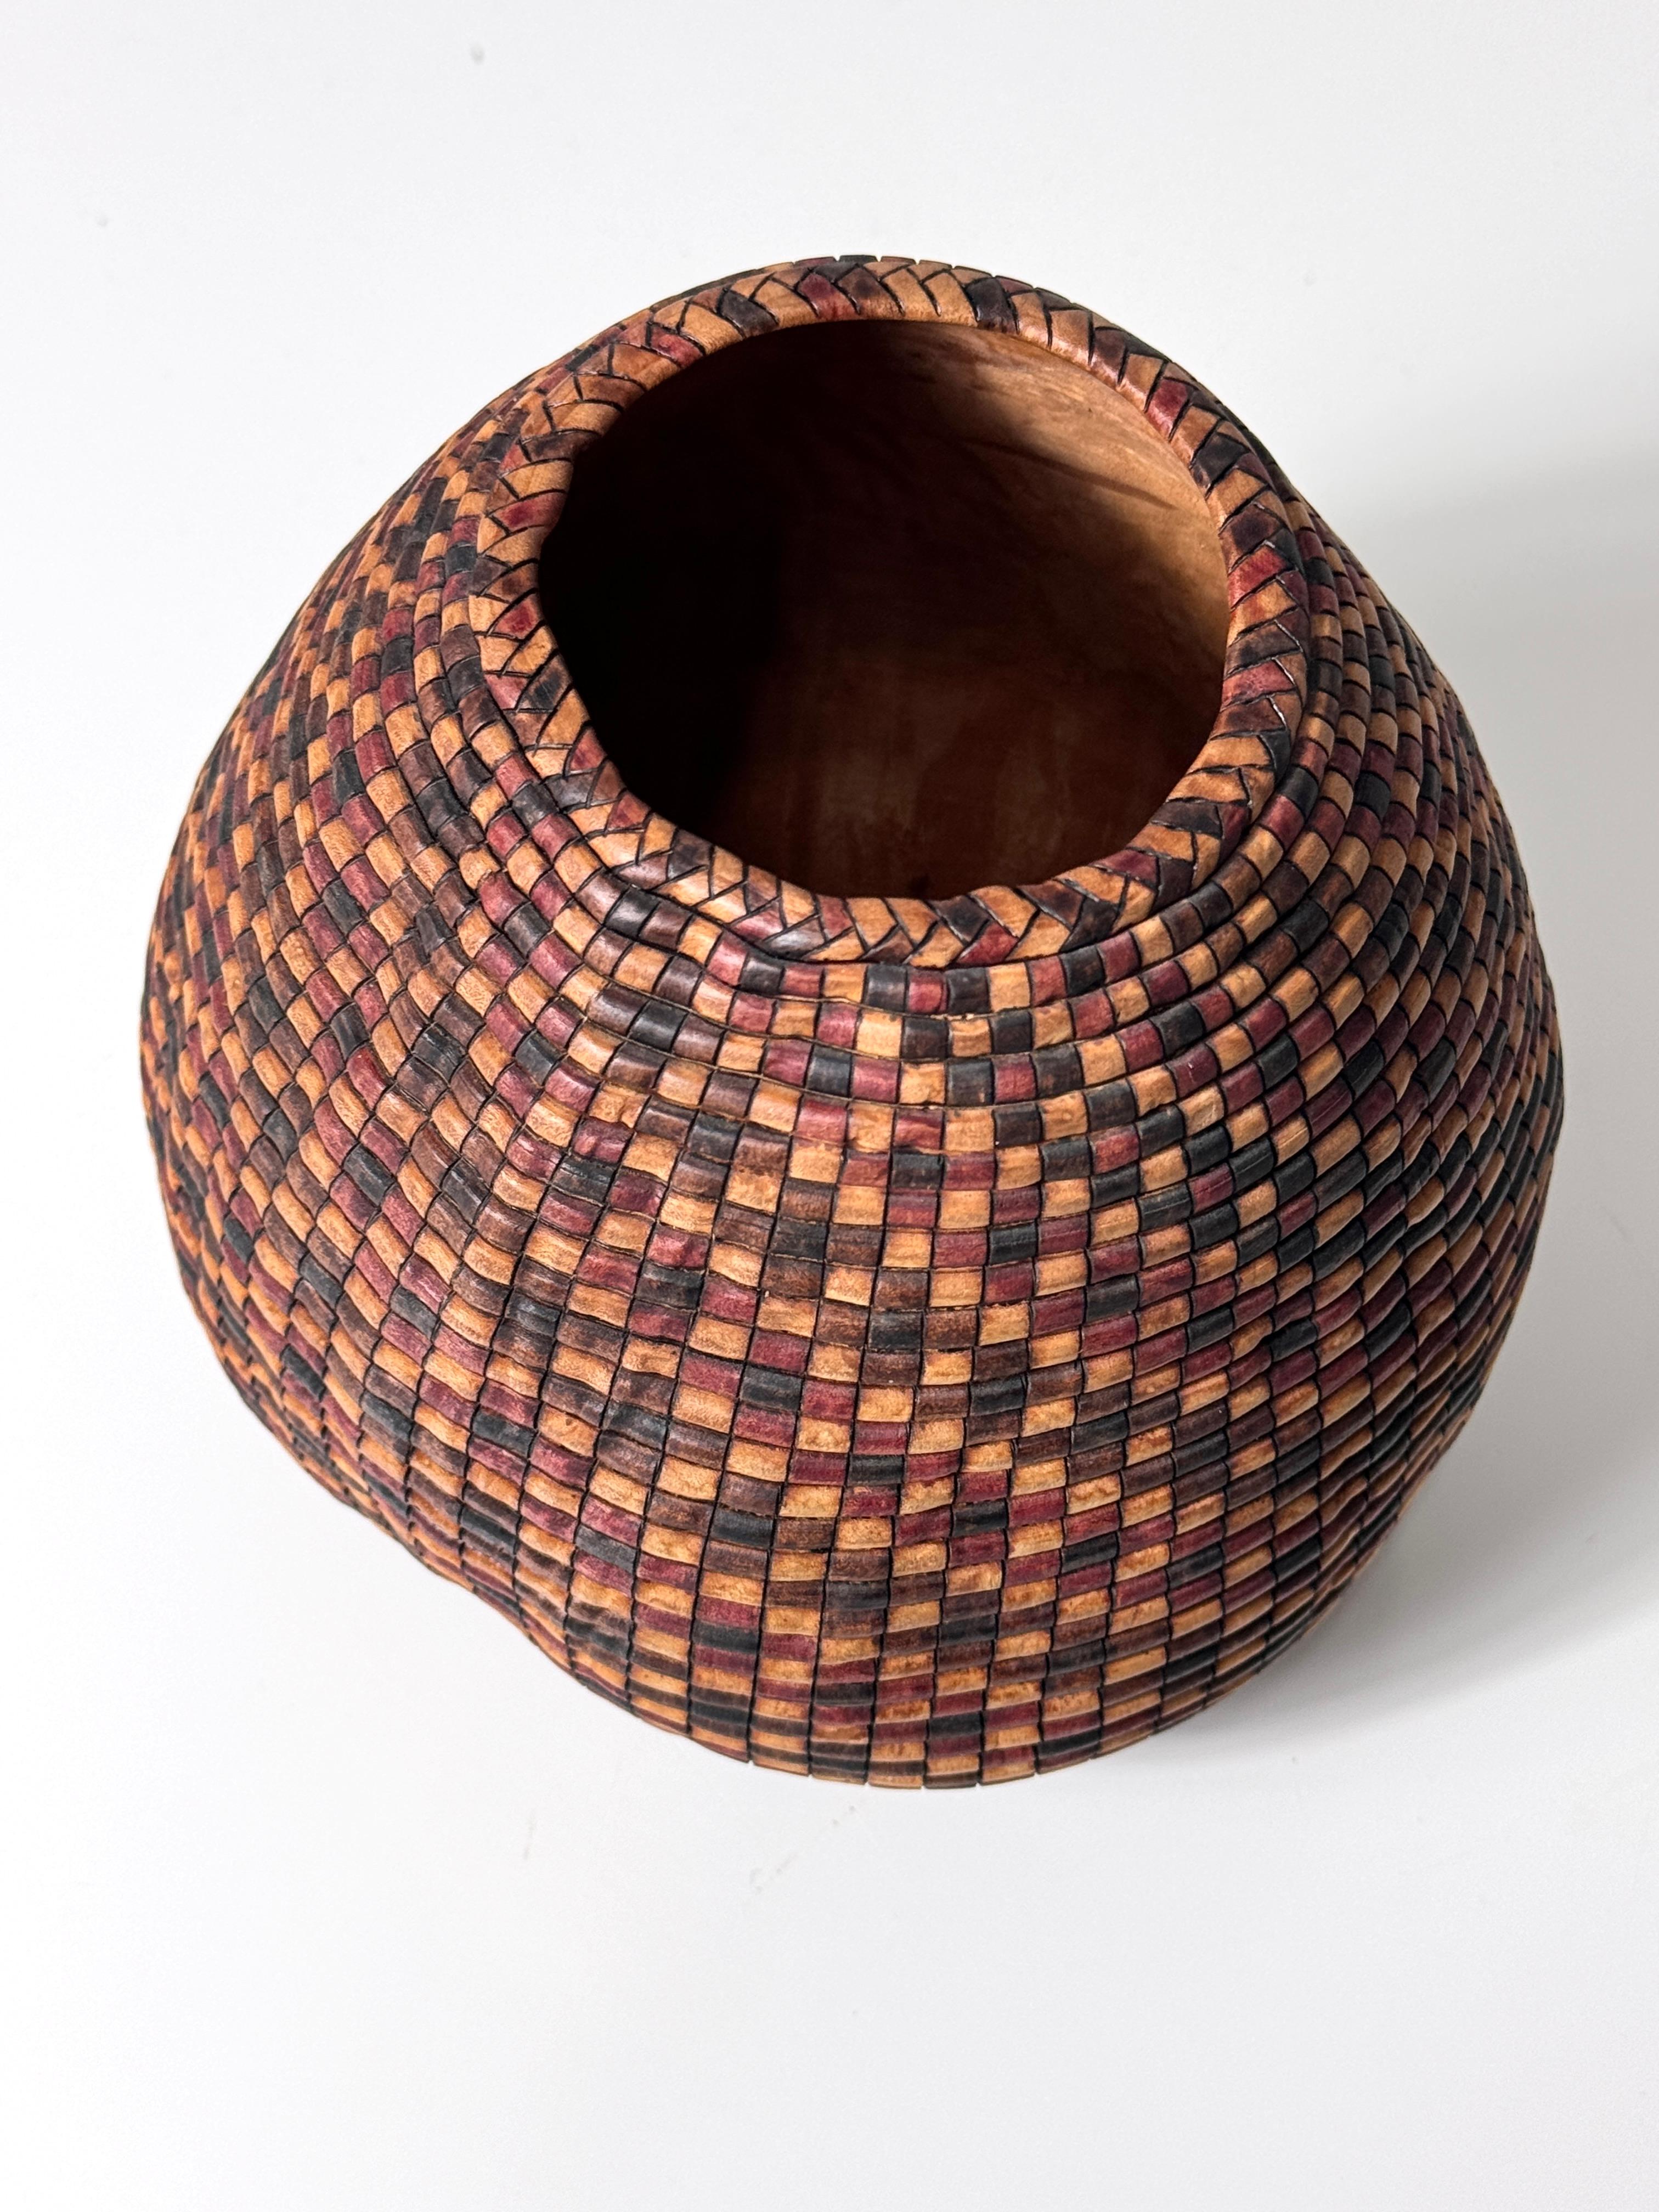 American Studio Turned Wood Basket Illusion Vessel Bowl by David Nittmann 1990s In Good Condition For Sale In Troy, MI